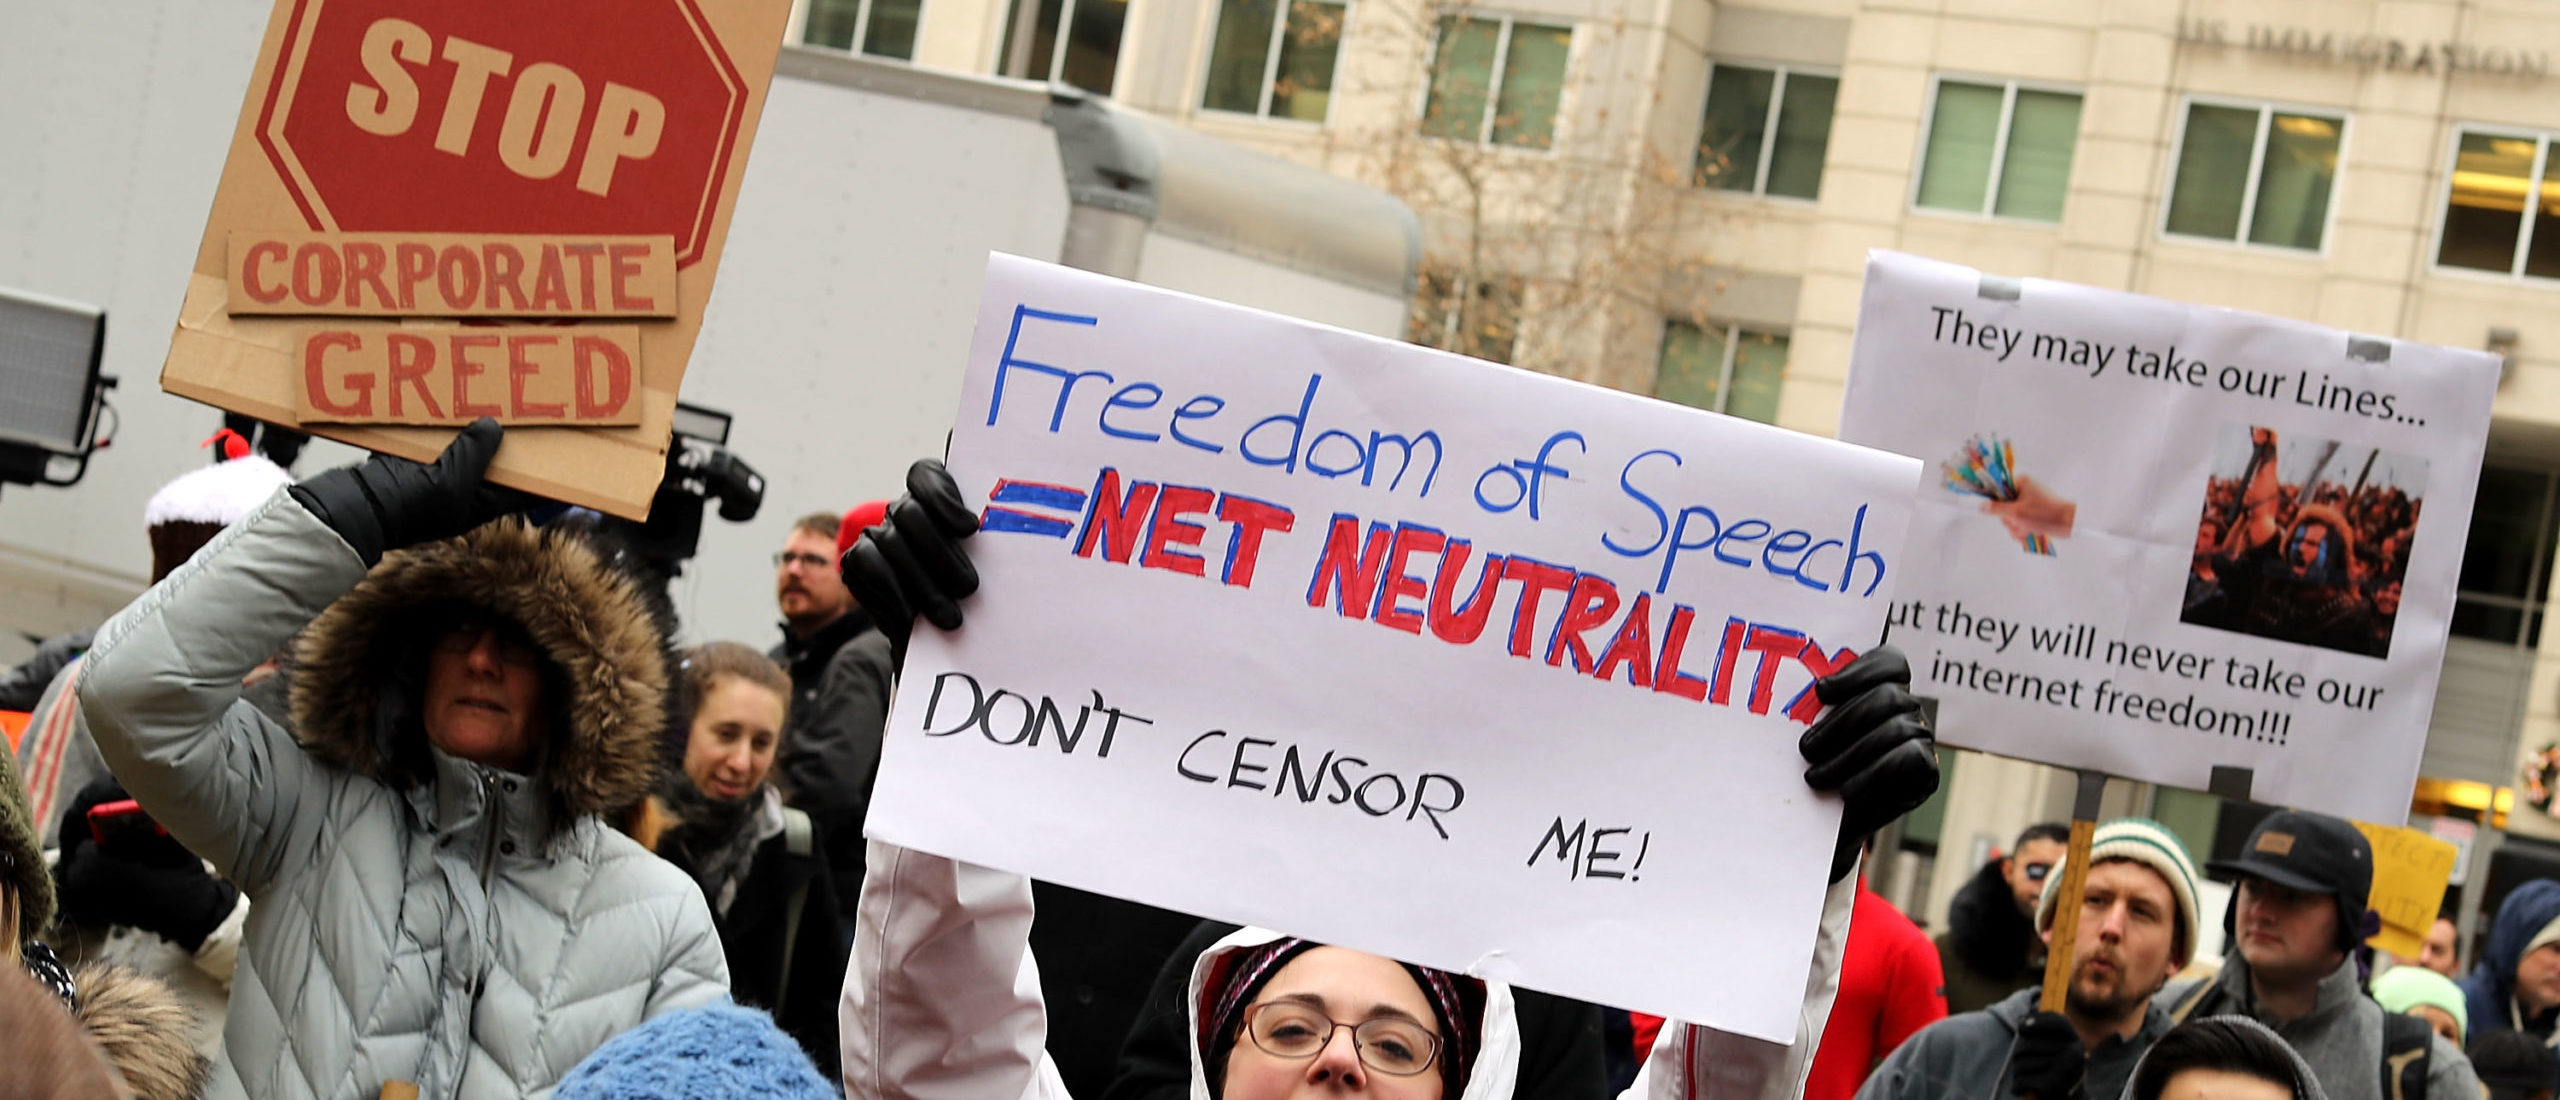 WASHINGTON, DC - DECEMBER 14: Demonstrators rally outside the Federal Communication Commission building to protest against the end of net neutralityrules December 14, 2017 in Washington, DC. Lead by FCC Chairman Ajit Pai, the commission is expected to do away with Obama Administration rules that prevented internet service providers from creating different levels of service and blocking or promoting individual companies and organizations on their systems. (Photo by Chip Somodevilla/Getty Images)